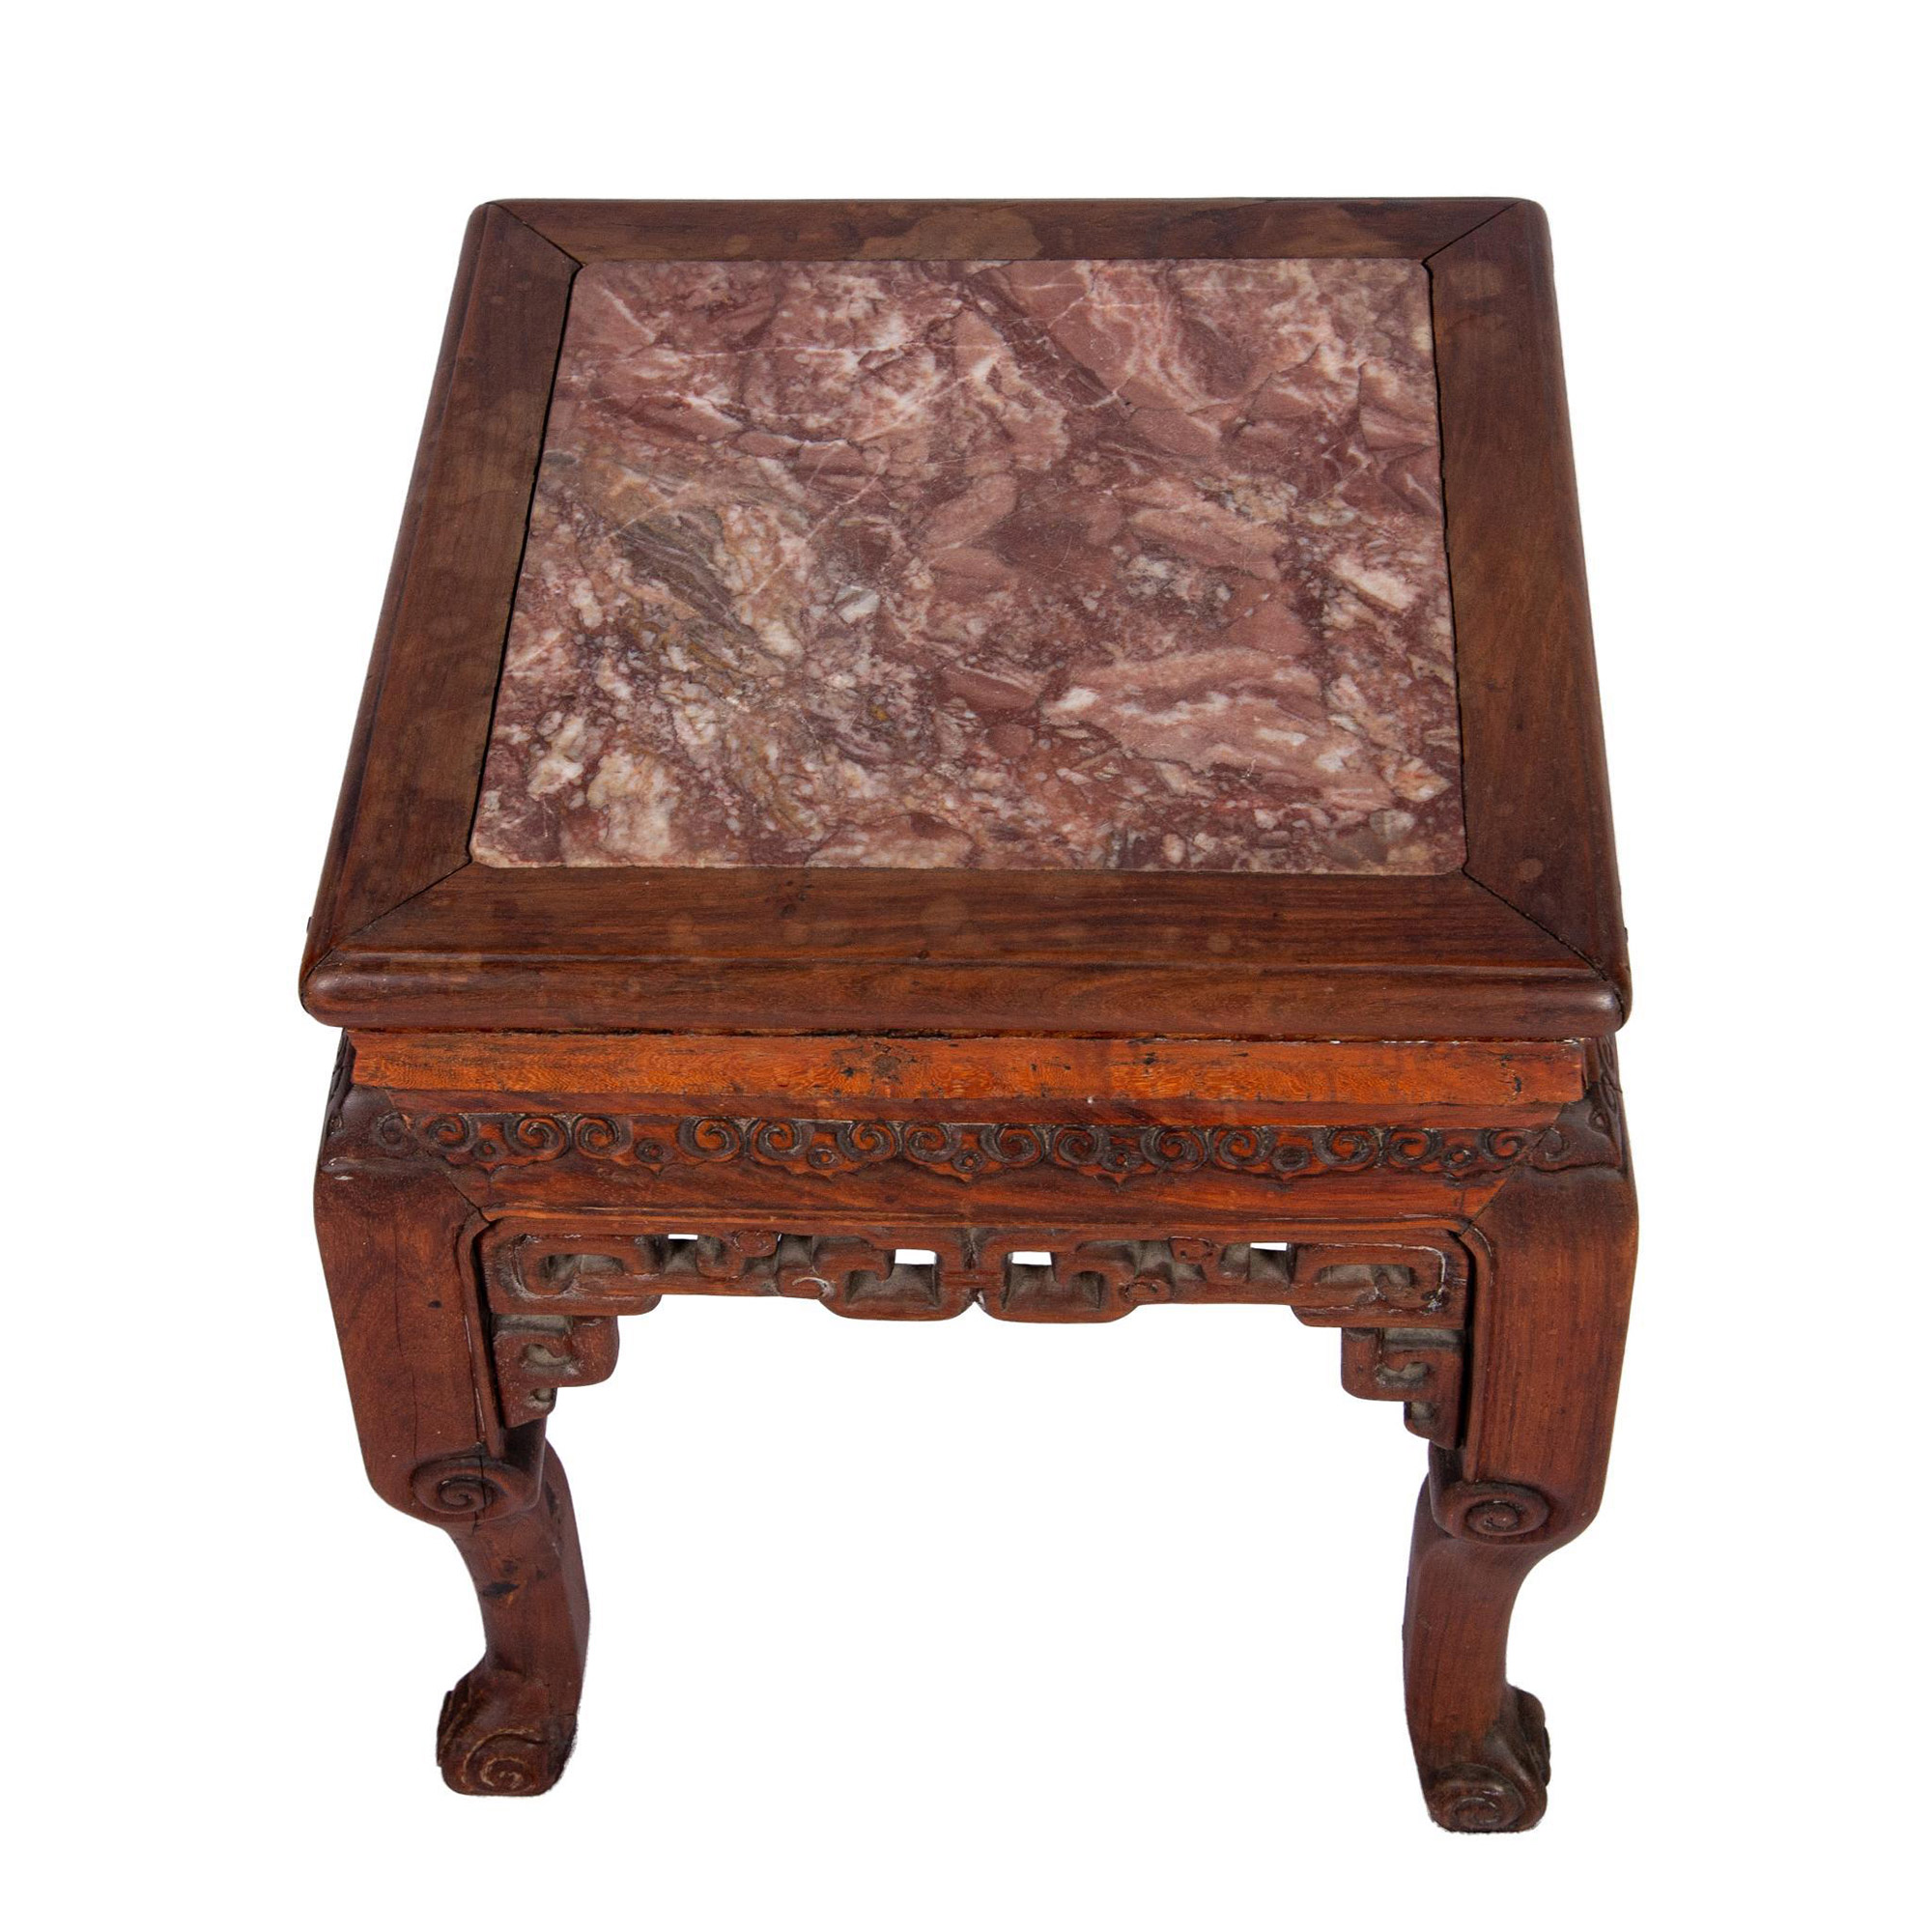 Antique Chinese Side Table in Ebonized Wood with Marble Top - Image 2 of 3